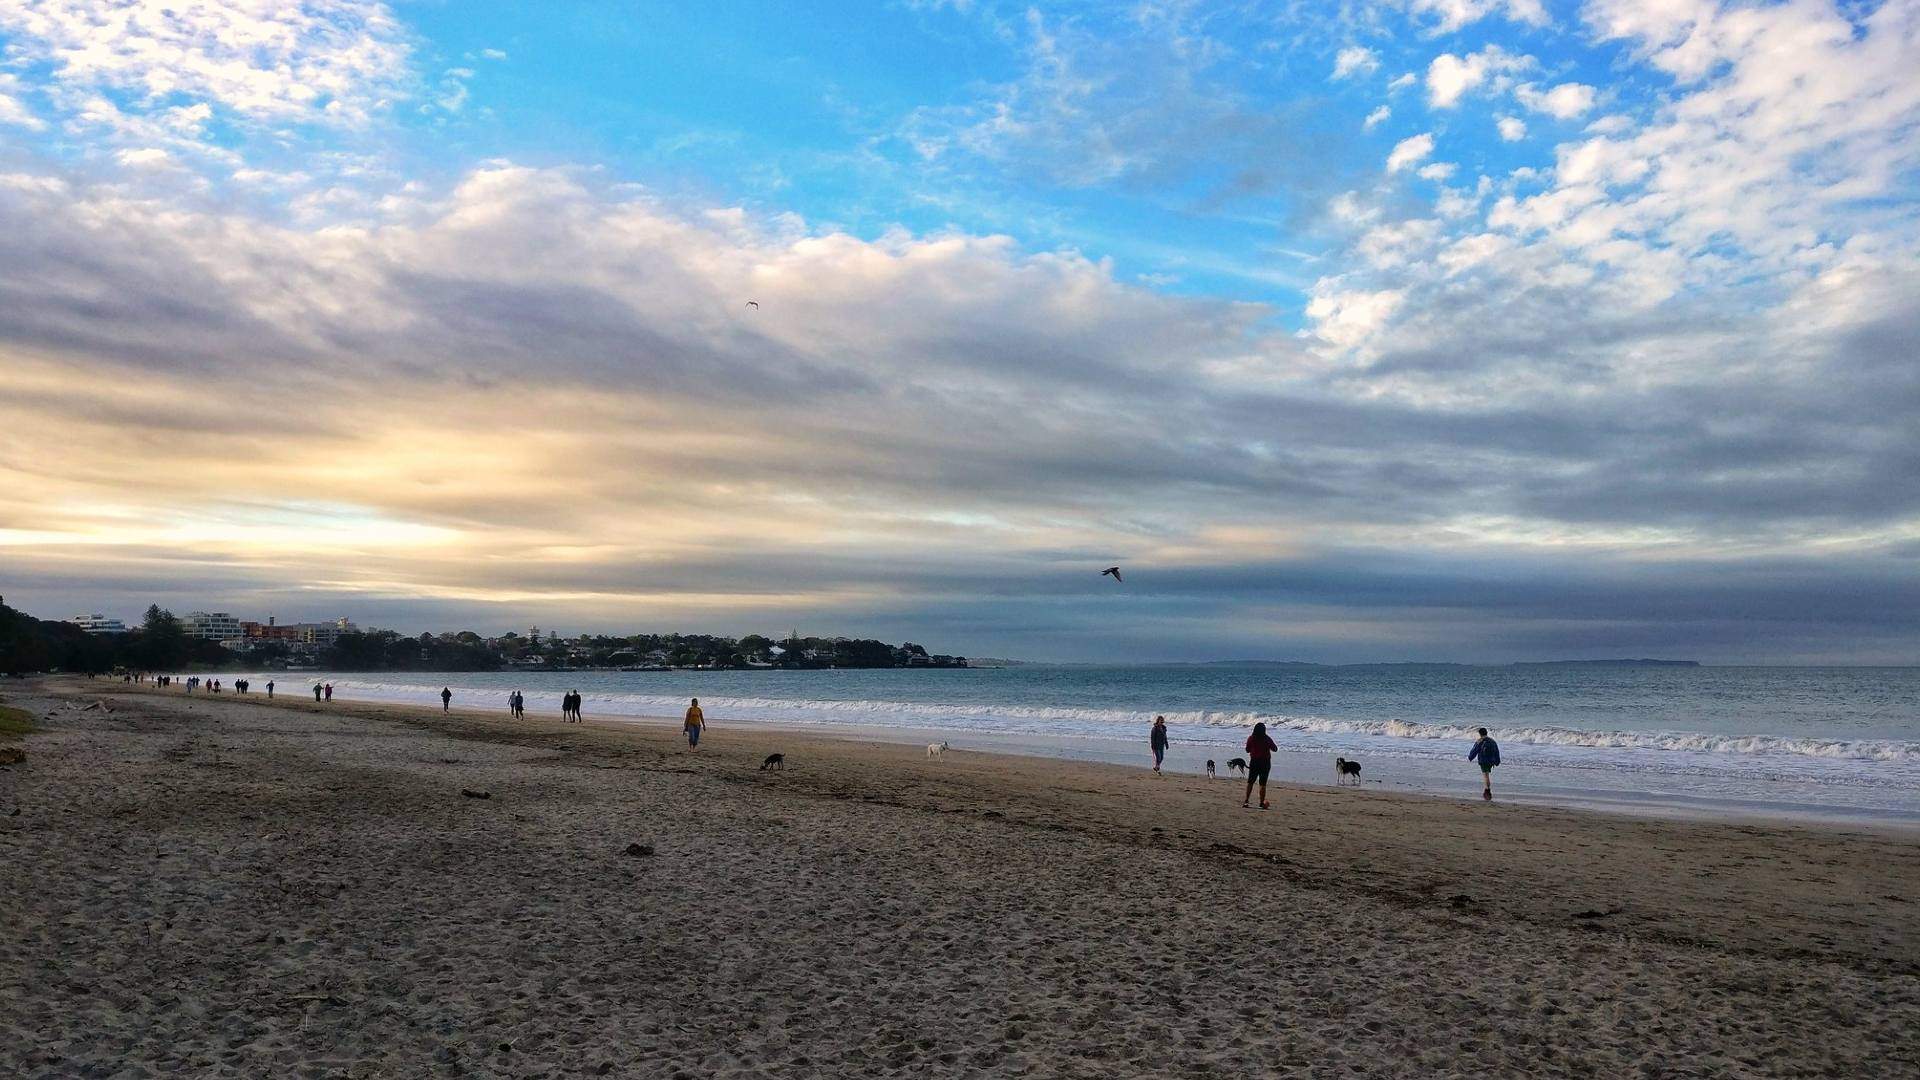 Five Rewarding Pit Stops to Make When You're Tackling the Devonport to Takapuna Run